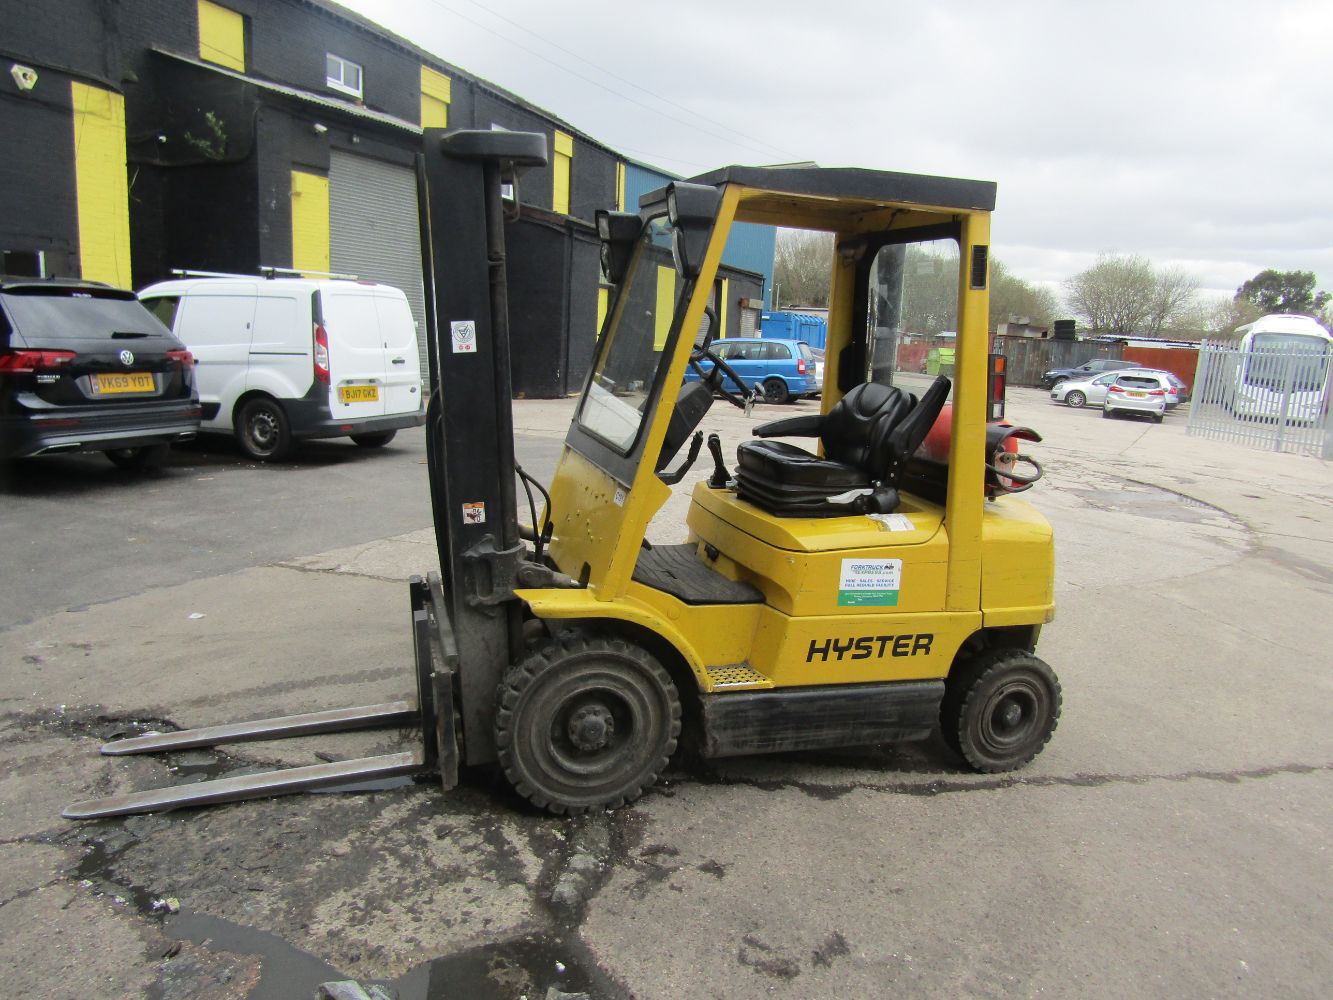 Hyster forklift truck with 10% buyers premium